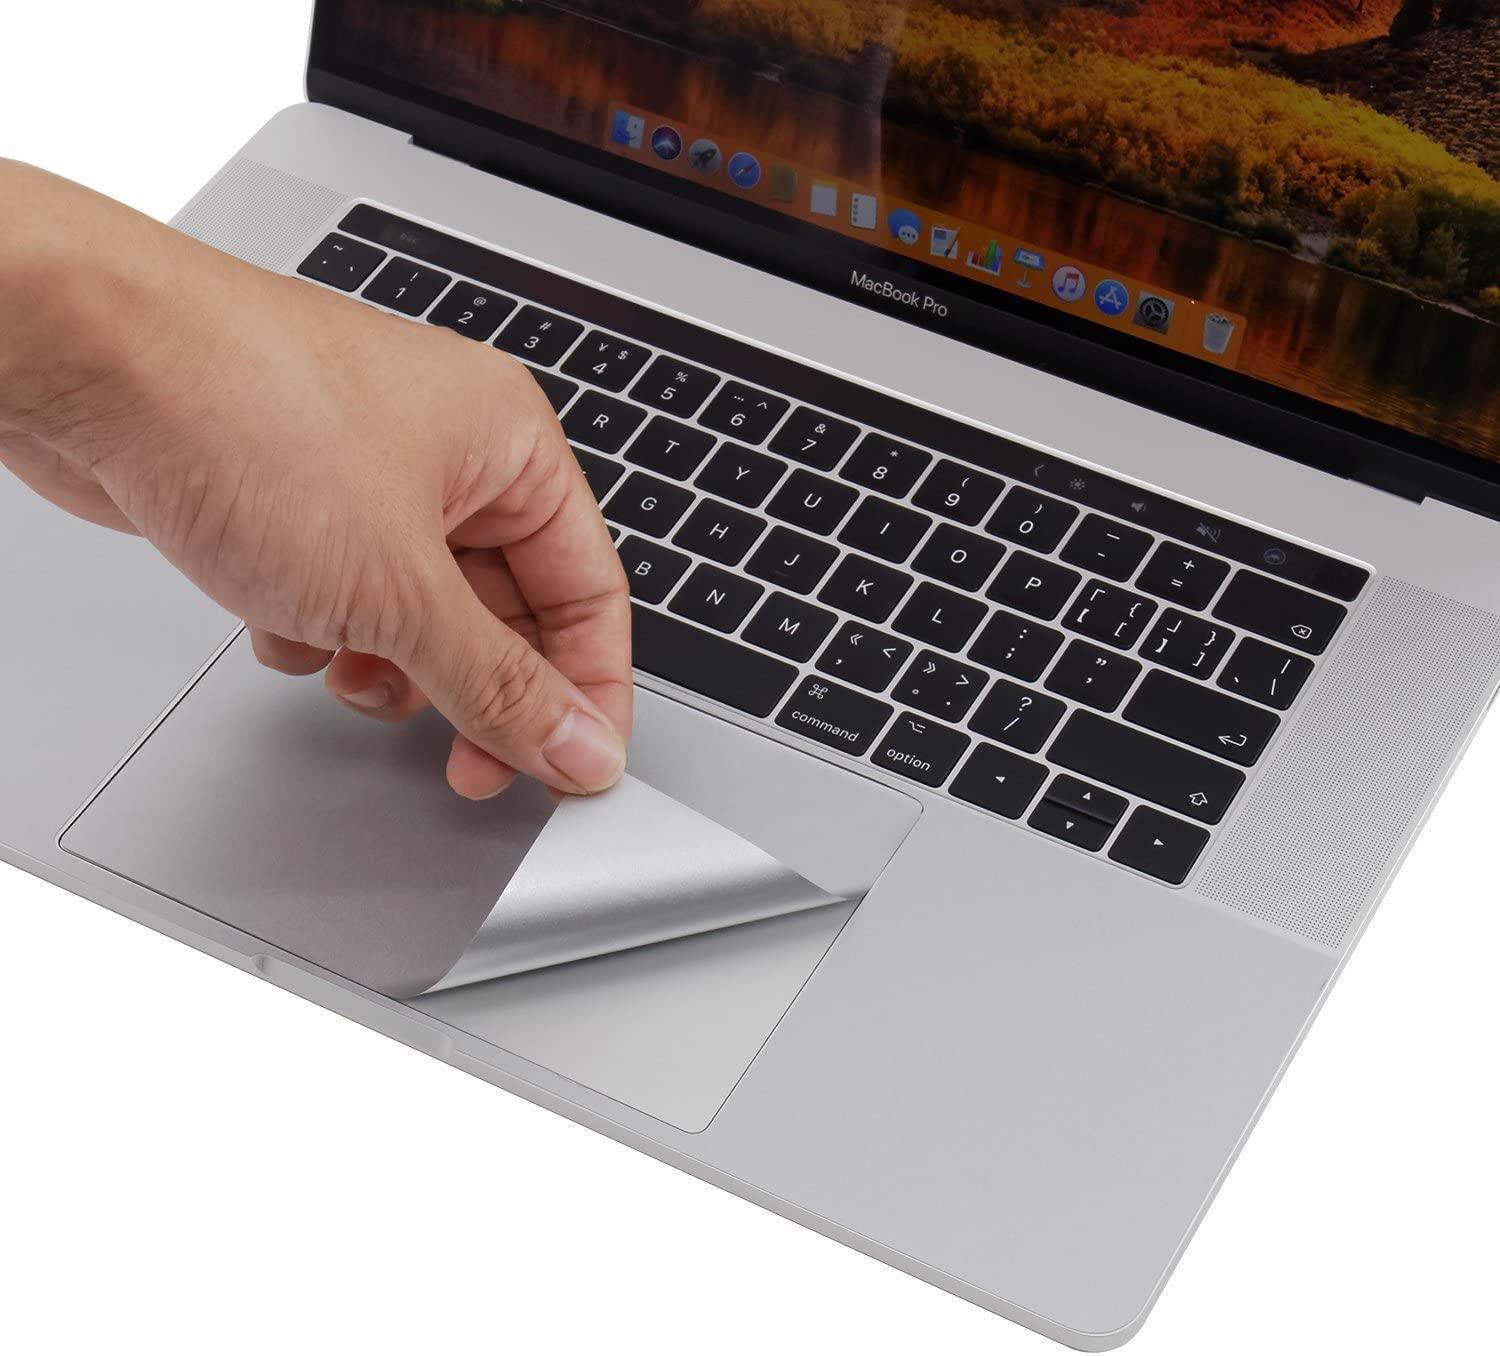 Palm Rest Protector Skin Cover & Track Pad for Macbook Pro 15